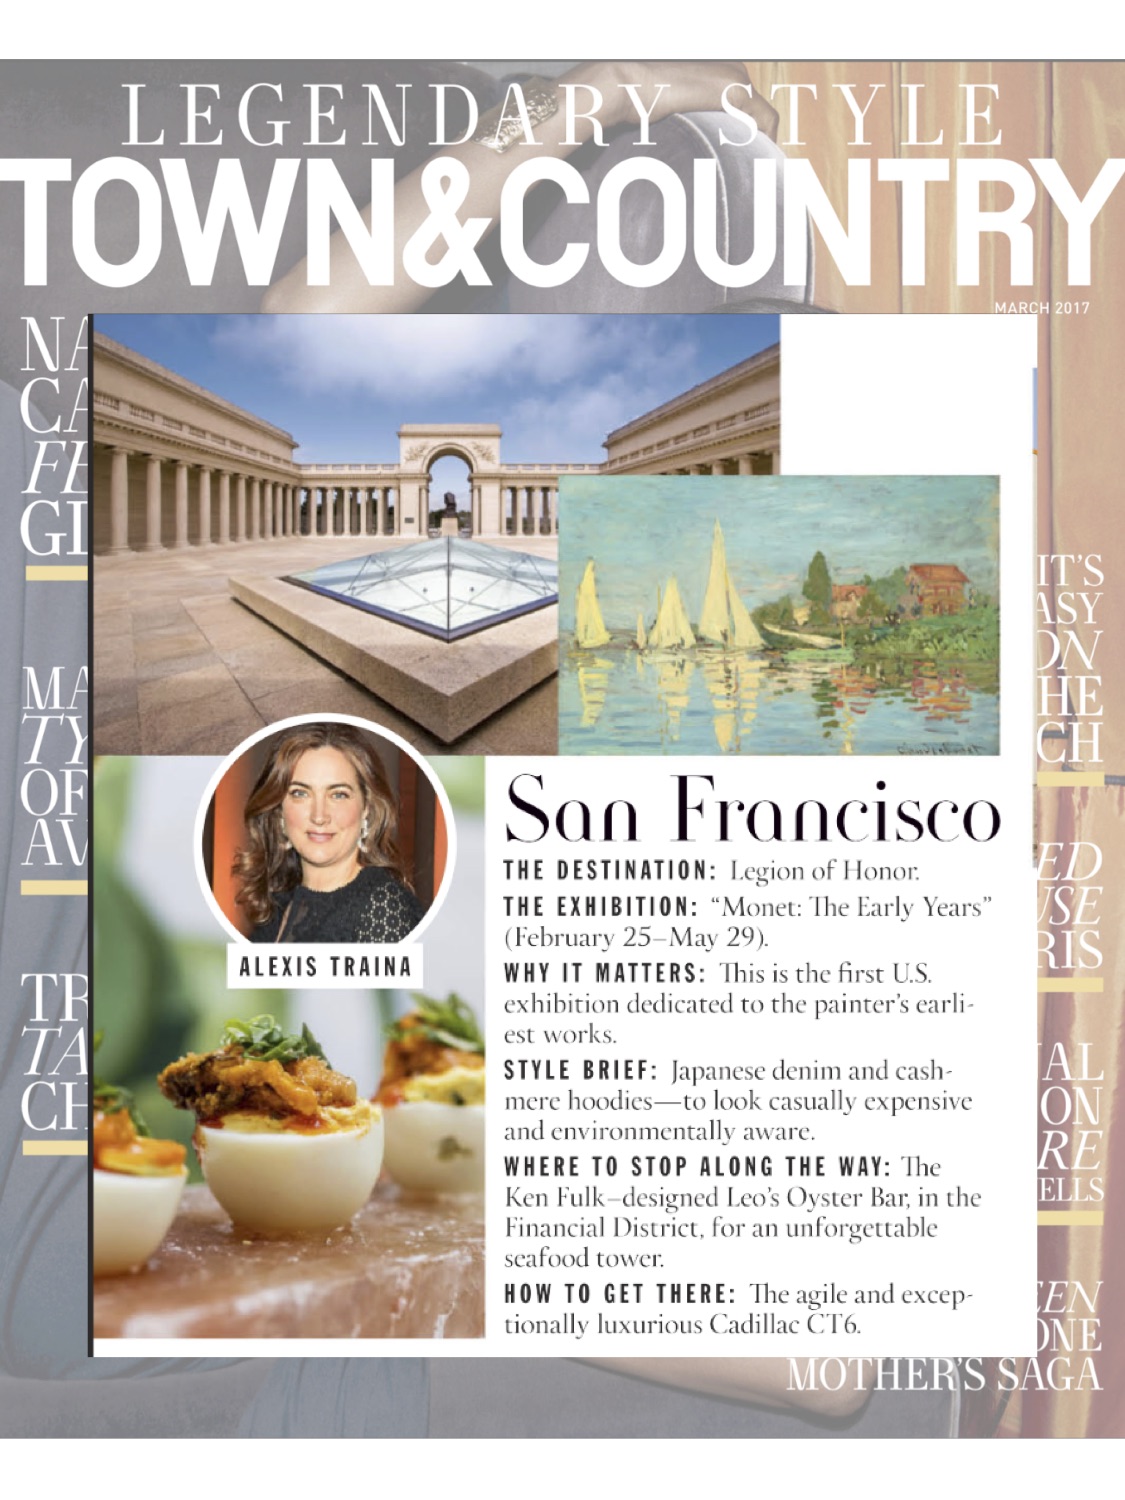 Town & Country Clip - Leo's.jpg